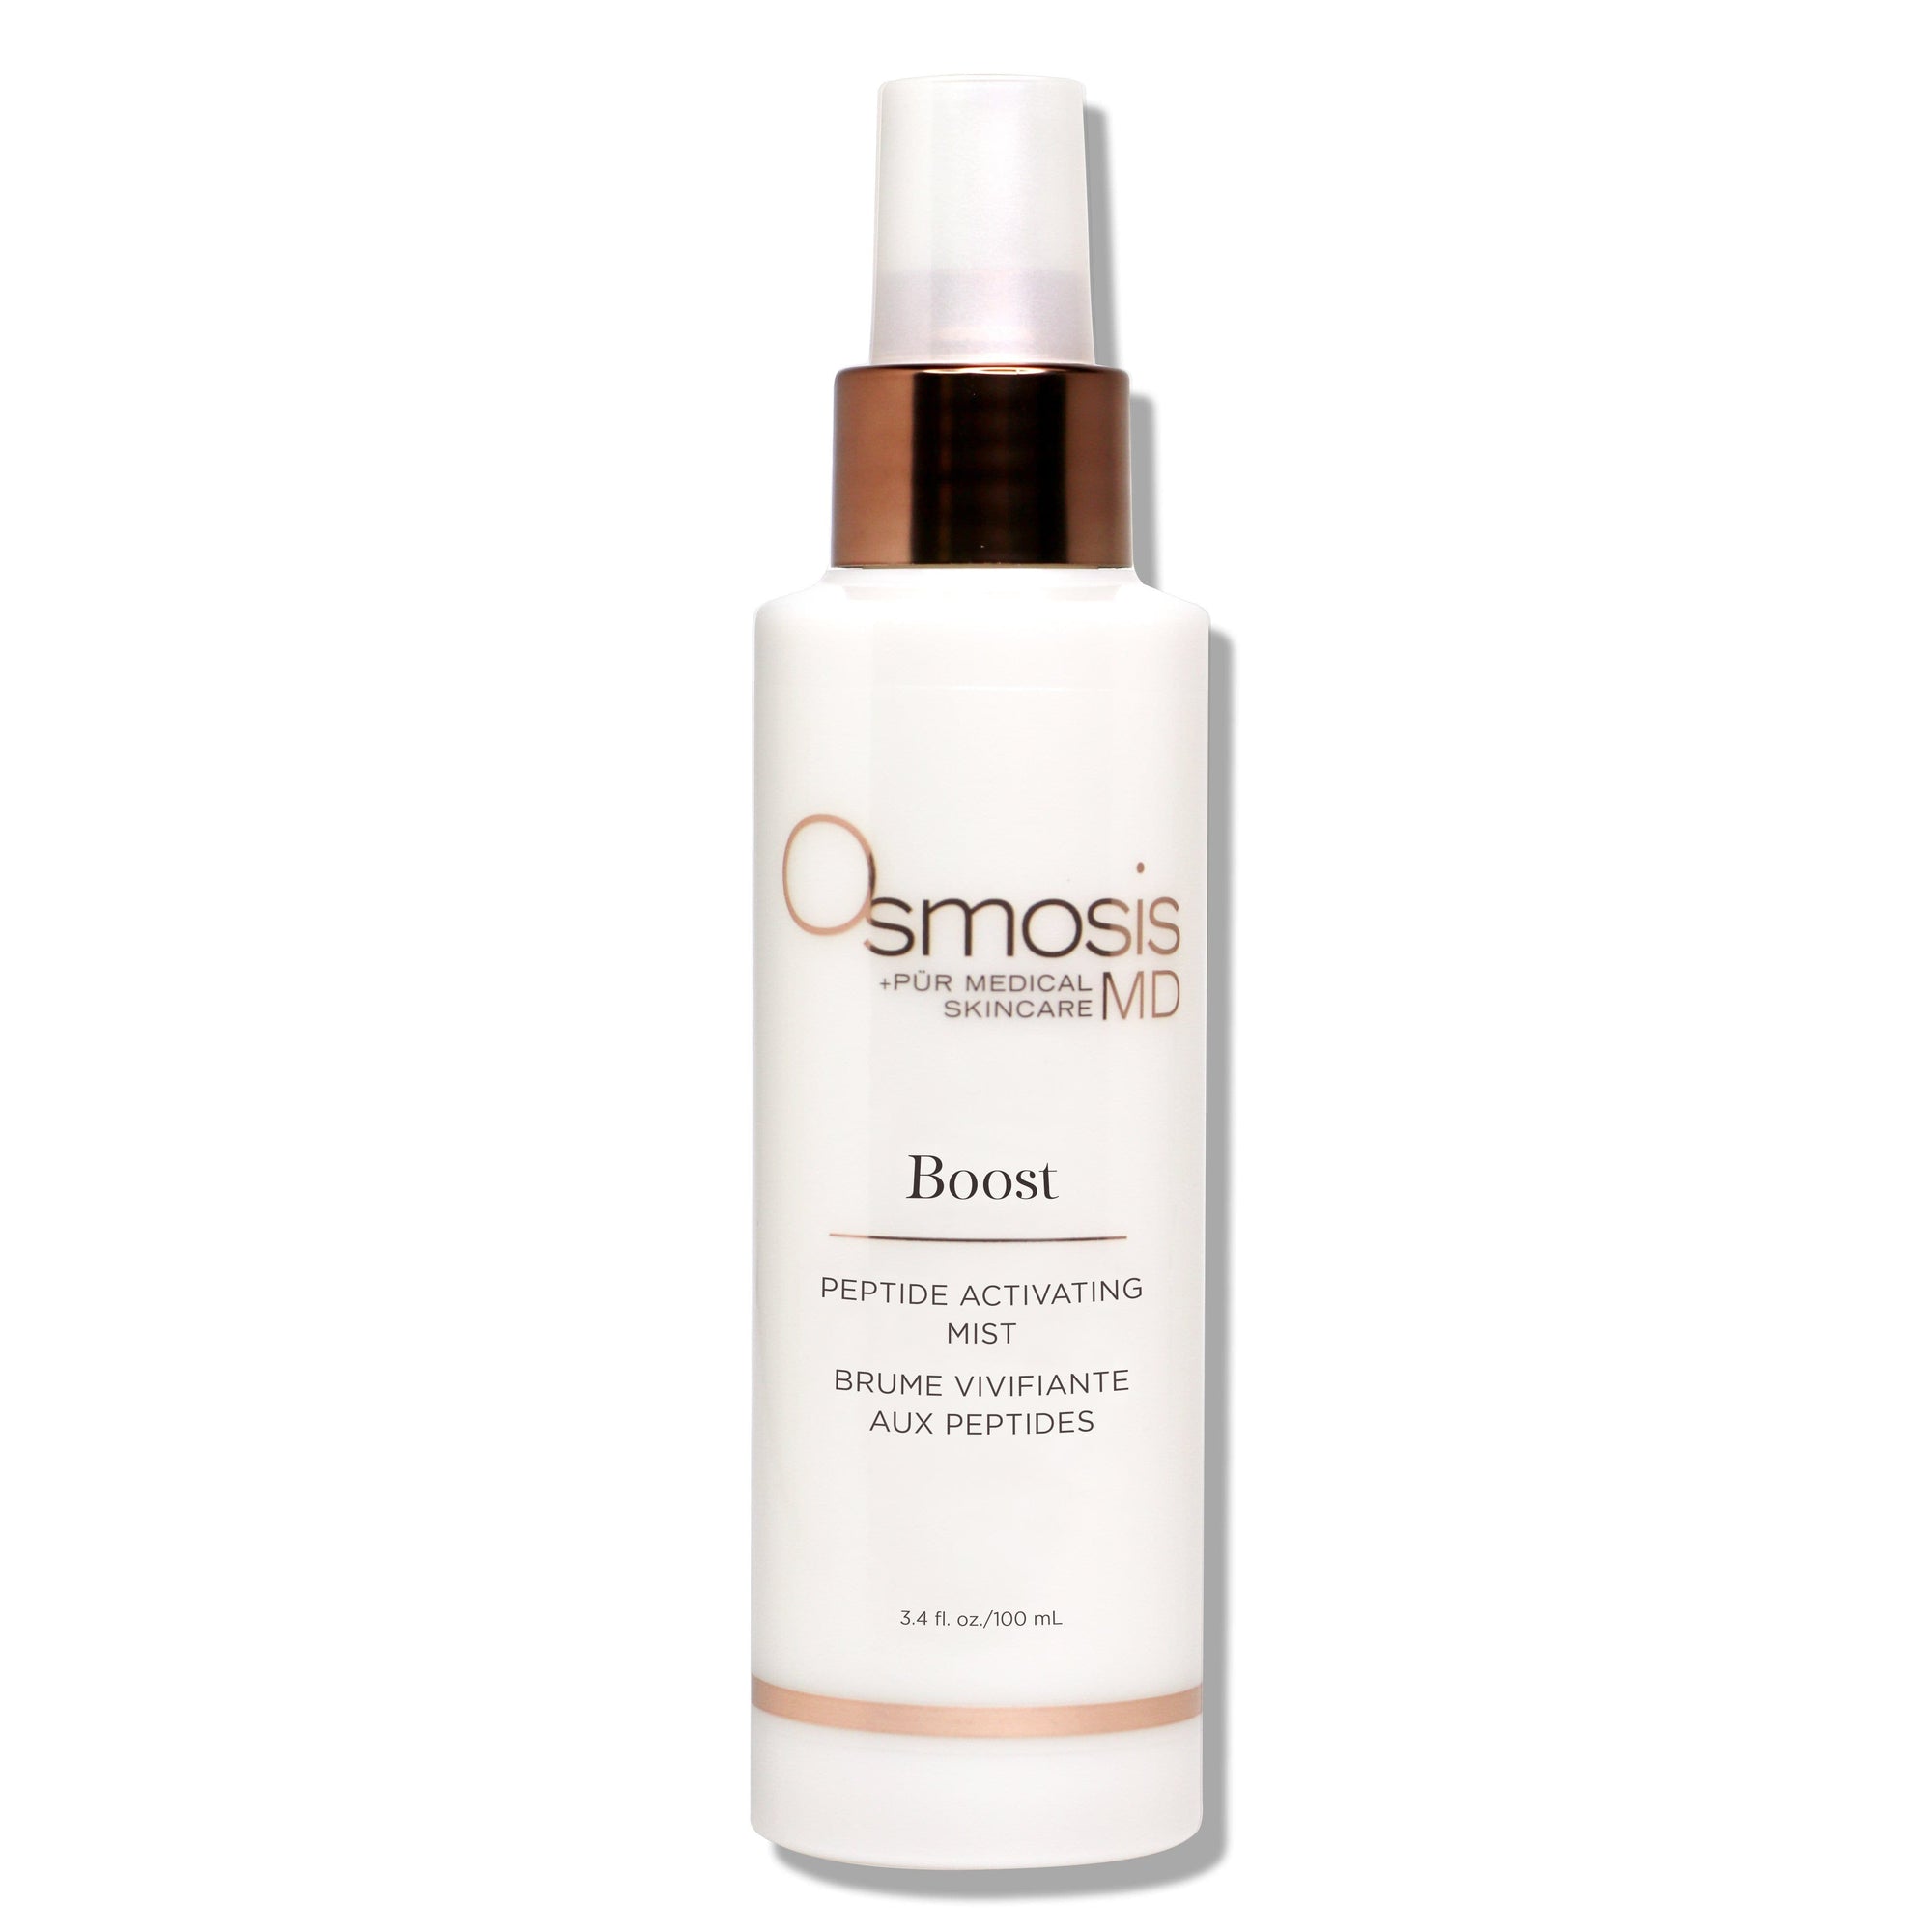 Osmosis MD Boost Peptide Activating Mist 3.4 fl oz